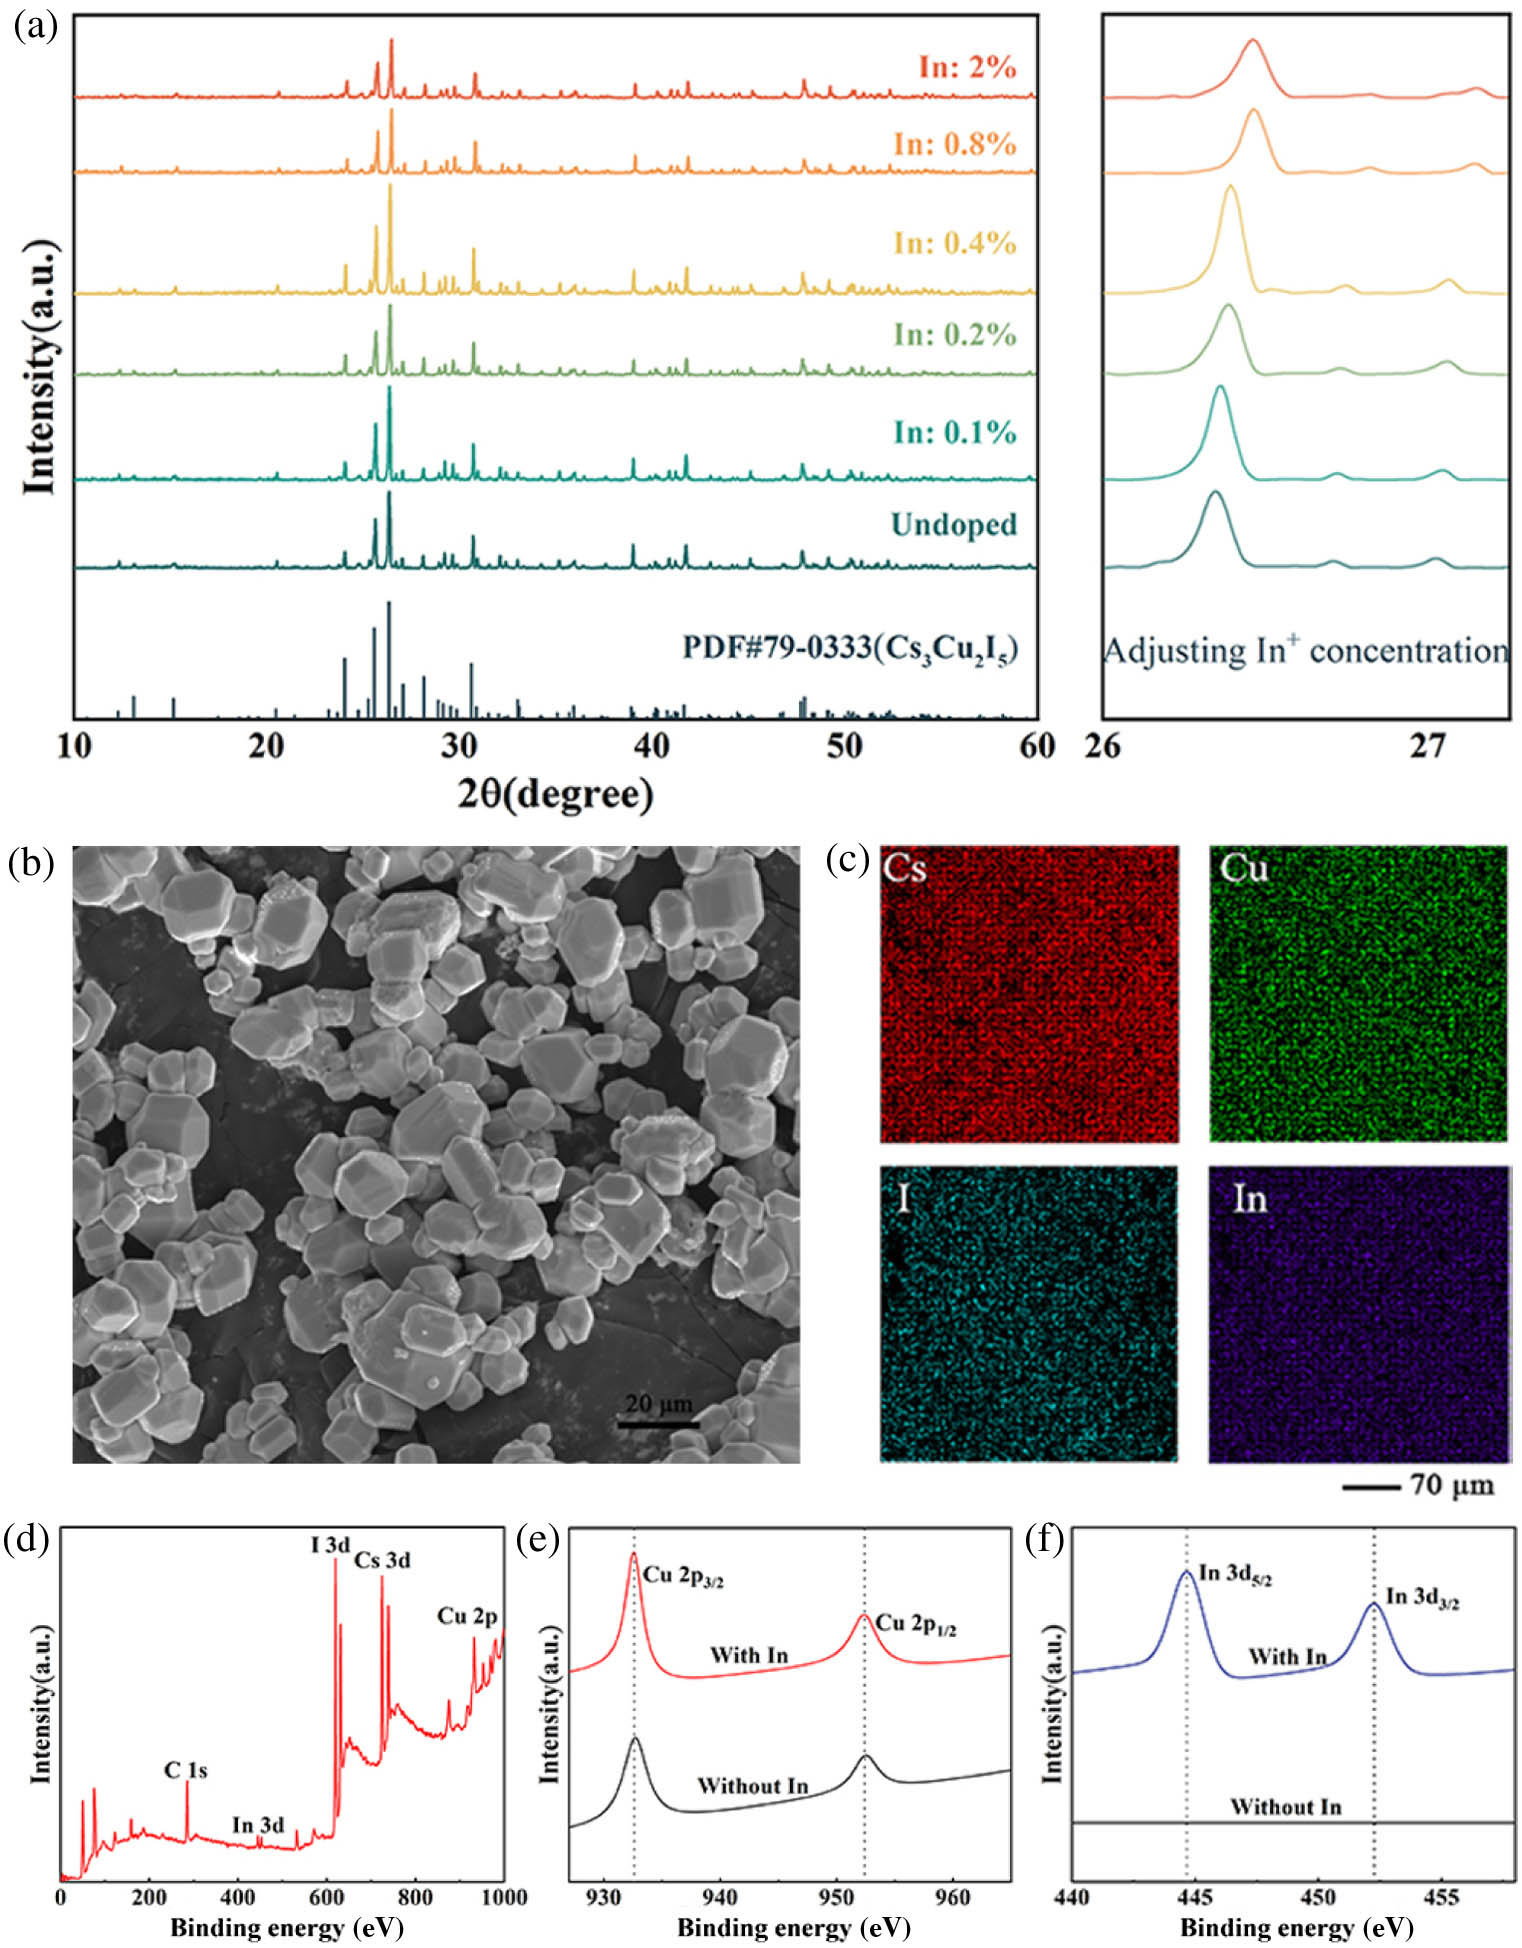 Characterization details of the Cs3Cu2I5:In powders. (a) XRD patterns of the Cs3Cu2I5 powders samples doped with different indium concentrations (top), compared with the orthorhombic Cs3Cu2I5 at the bottom (PDF#79-0333). (b) SEM image of the Cs3Cu2I5:In powders. (c) Elemental mapping images of the Cs3Cu2I5:2%In powders. (d) XPS survey spectrum of the Cs3Cu2I5:In powders. (e), (f) High-resolution XPS profiles of Cu (2p3/2 and 2p1/2) and In (3d5/2 and 3d3/2) of the Cs3Cu2I5 powders synthesized with and without In, respectively.